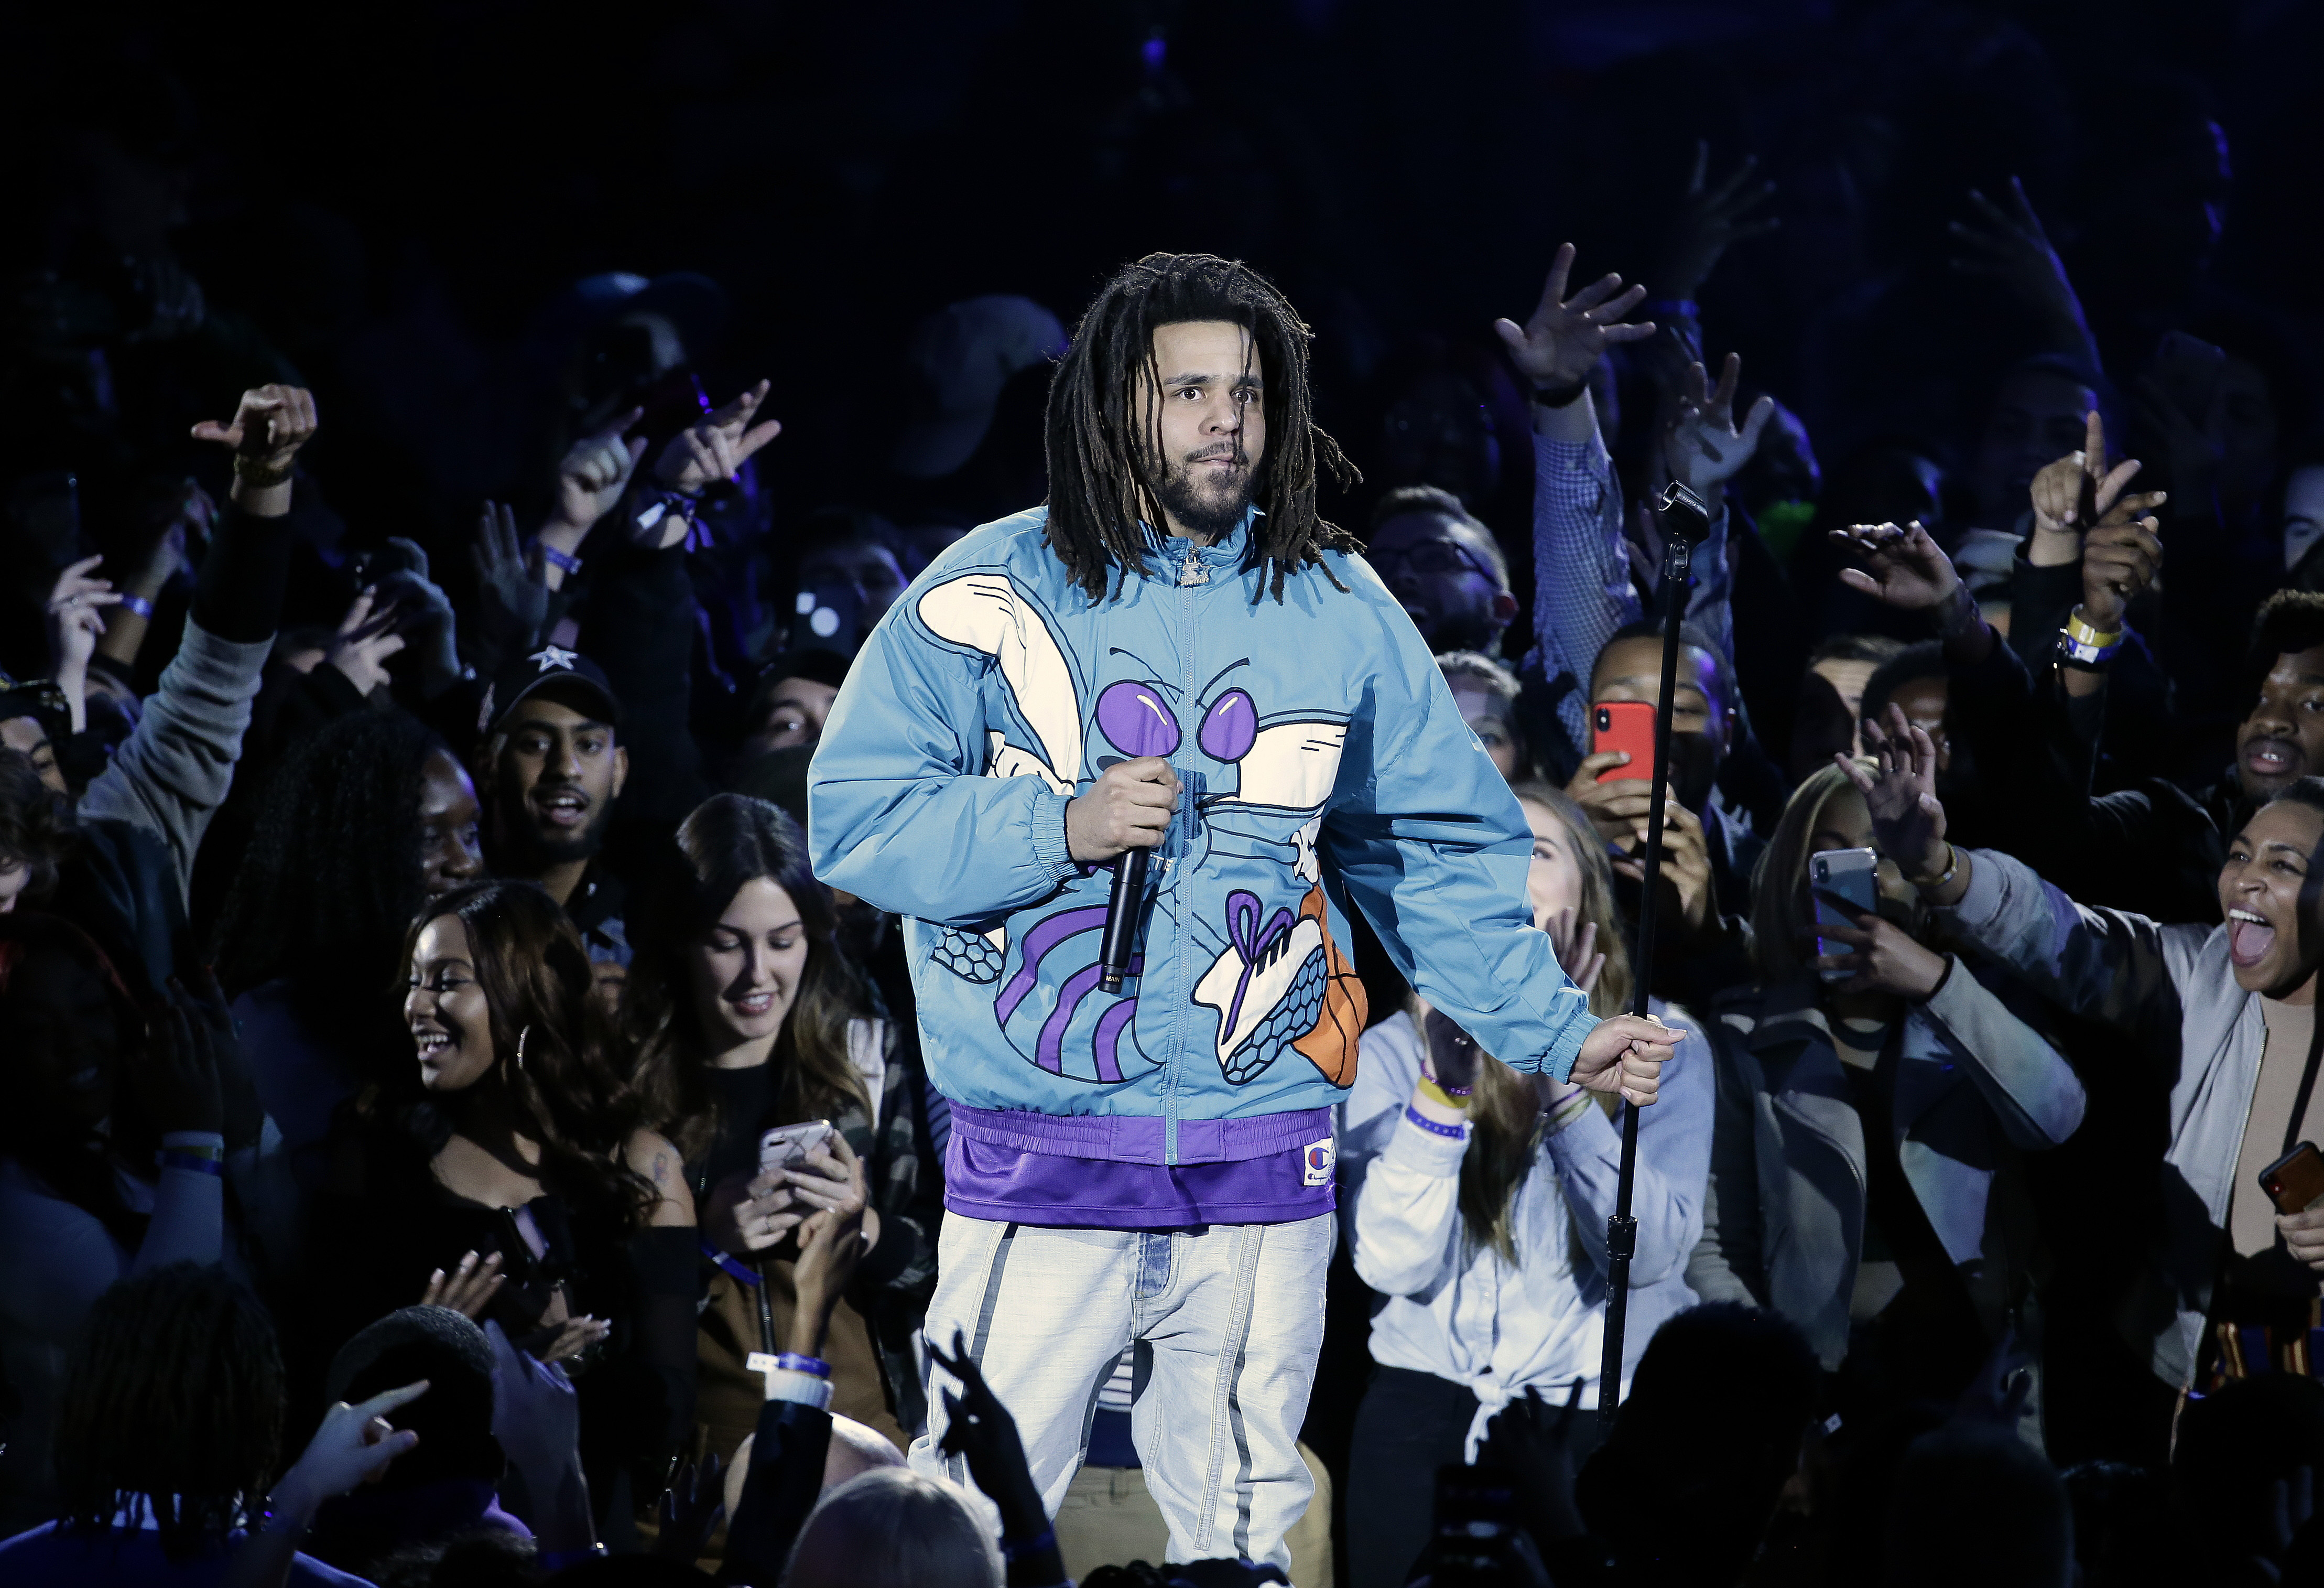 The Off-Season rapper J. Cole debuts in the Basketball Africa League